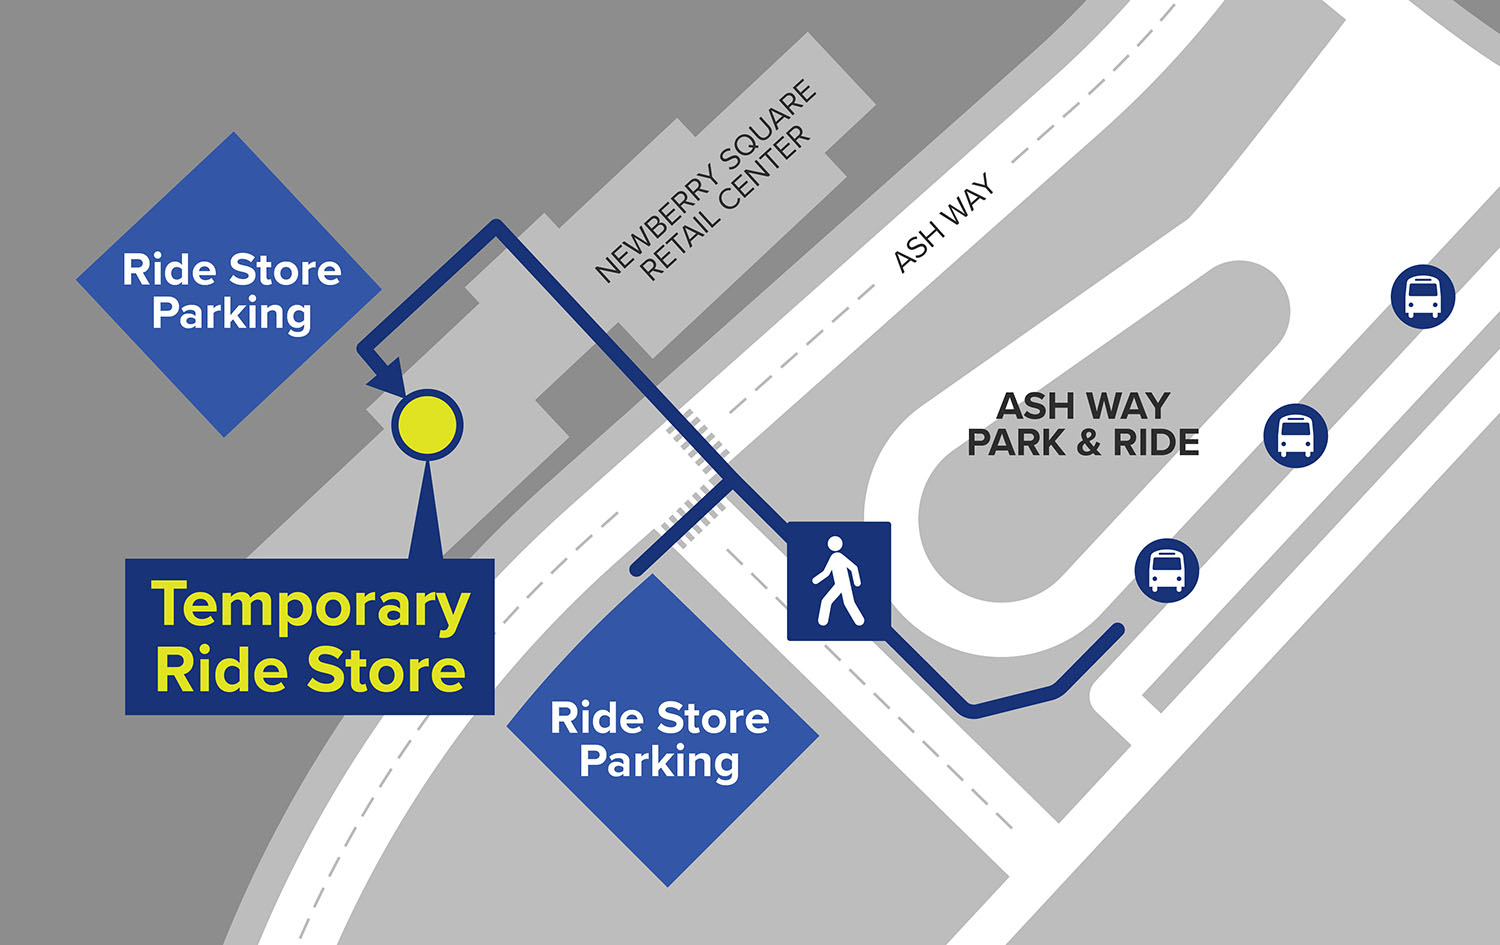 Map of the Community Transit RideStore location at Ash Way Park & Ride